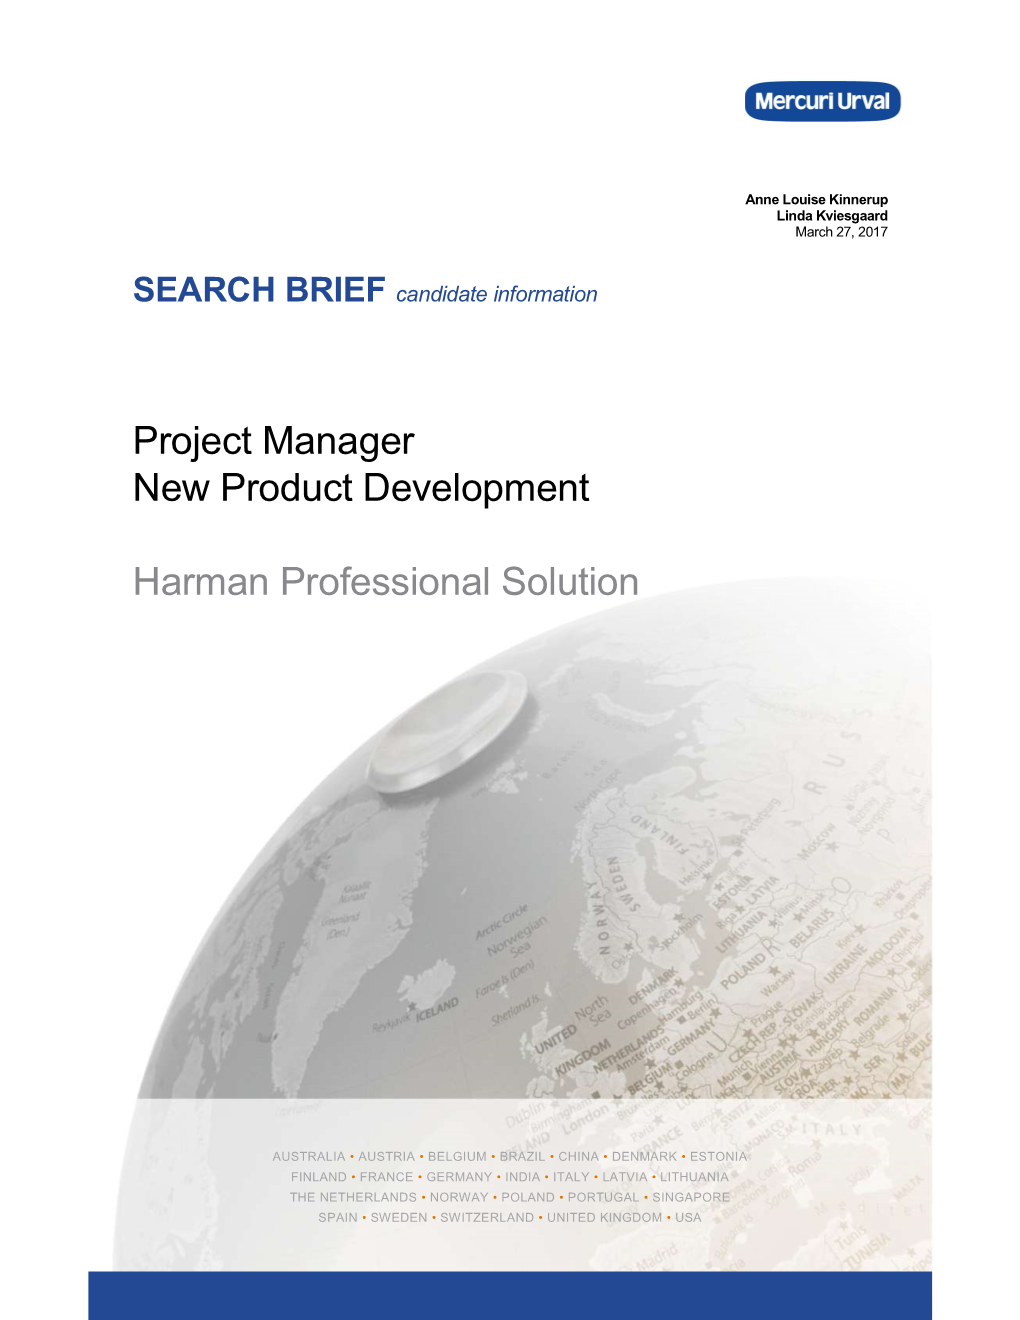 Project Manager New Product Development Harman Professional